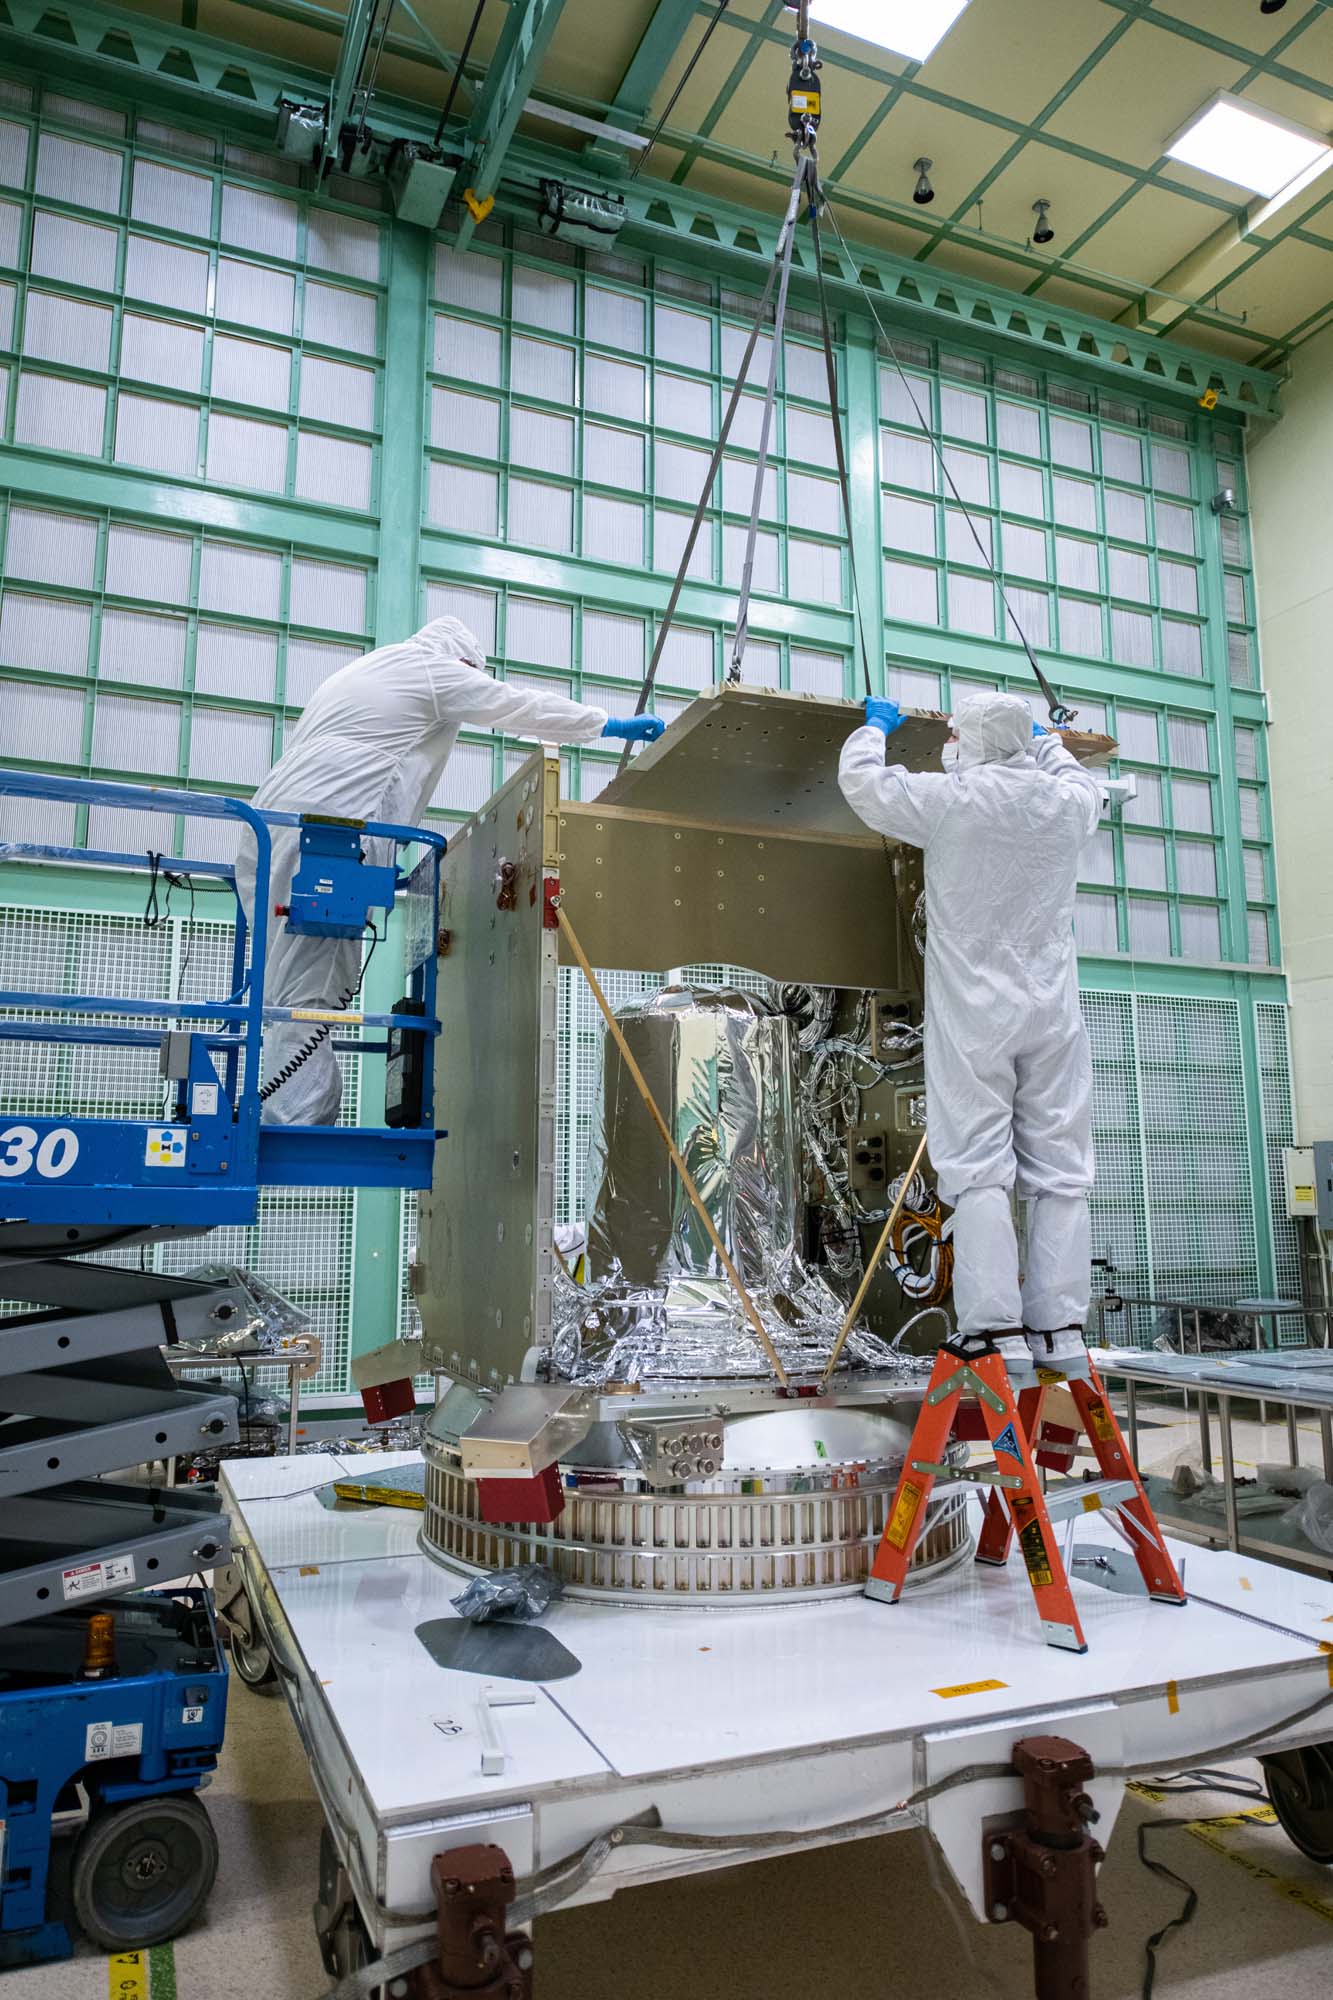 Installing the top of the PACE spacecraft bus structure.